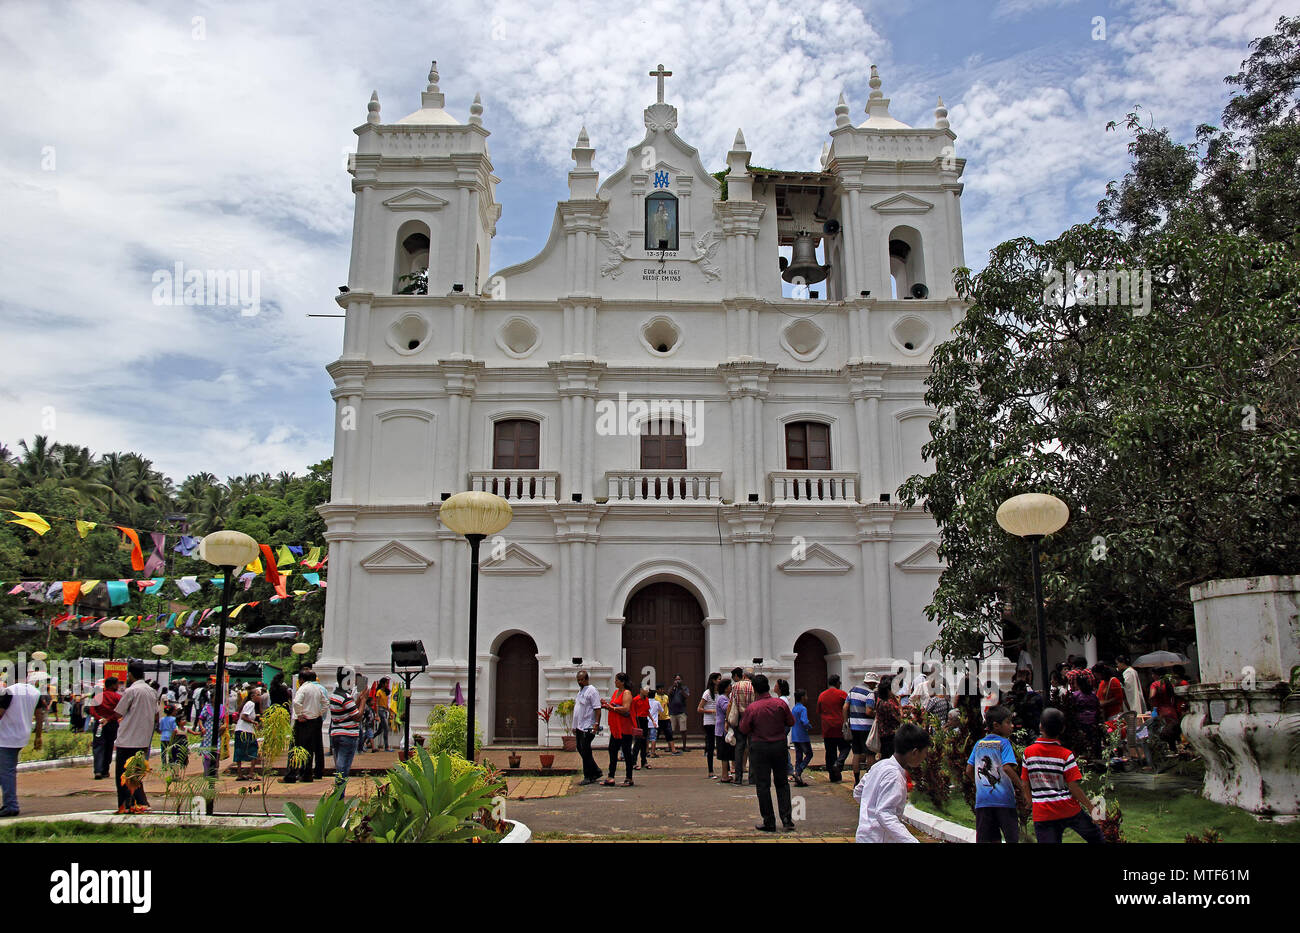 ourists and locals participate in annual Patolienchem fest that showcases trades, crafts and culture of Goa at Our Lady of Succour Church in Socorro. Stock Photo